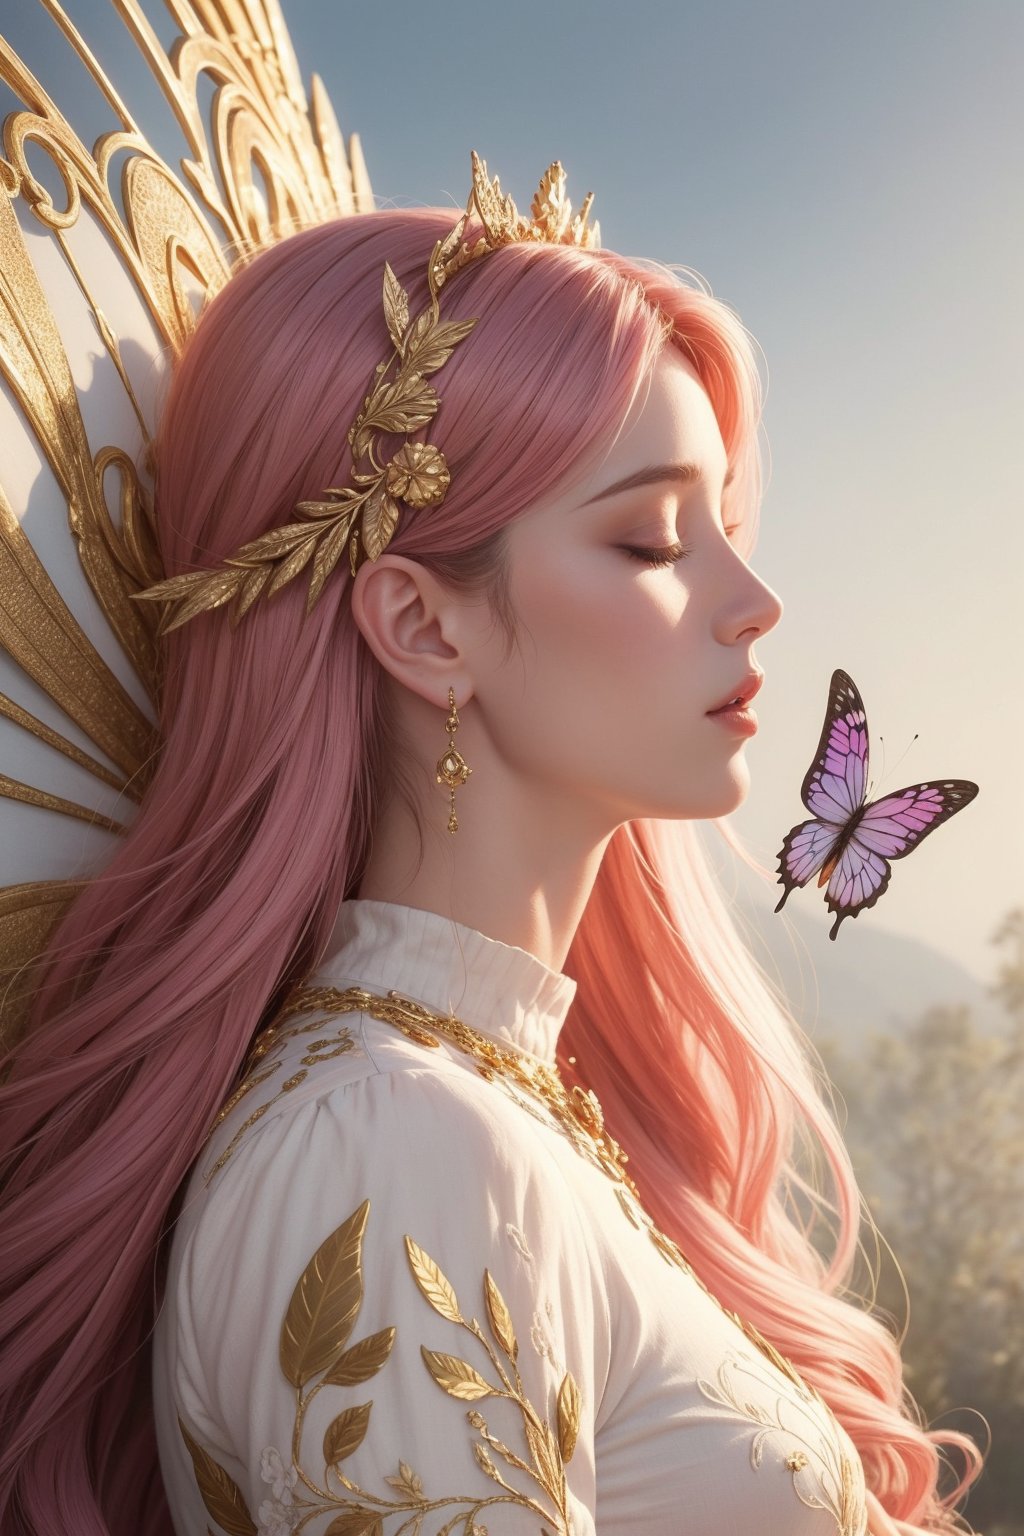 A close-up shot of the fairy-like figure's profile, bathed in a soft, golden glow emanating from the intricate wing structure. Her eyes are closed, revealing a serene expression as her hair seamlessly blends into the delicate feathers. The wings' tapestry of pastel to vibrant hues - purples, pinks, and golds - creates an ethereal effect. Texture-rich feather details evoke realism, while scattered light dots and butterfly motifs add a whimsical touch.